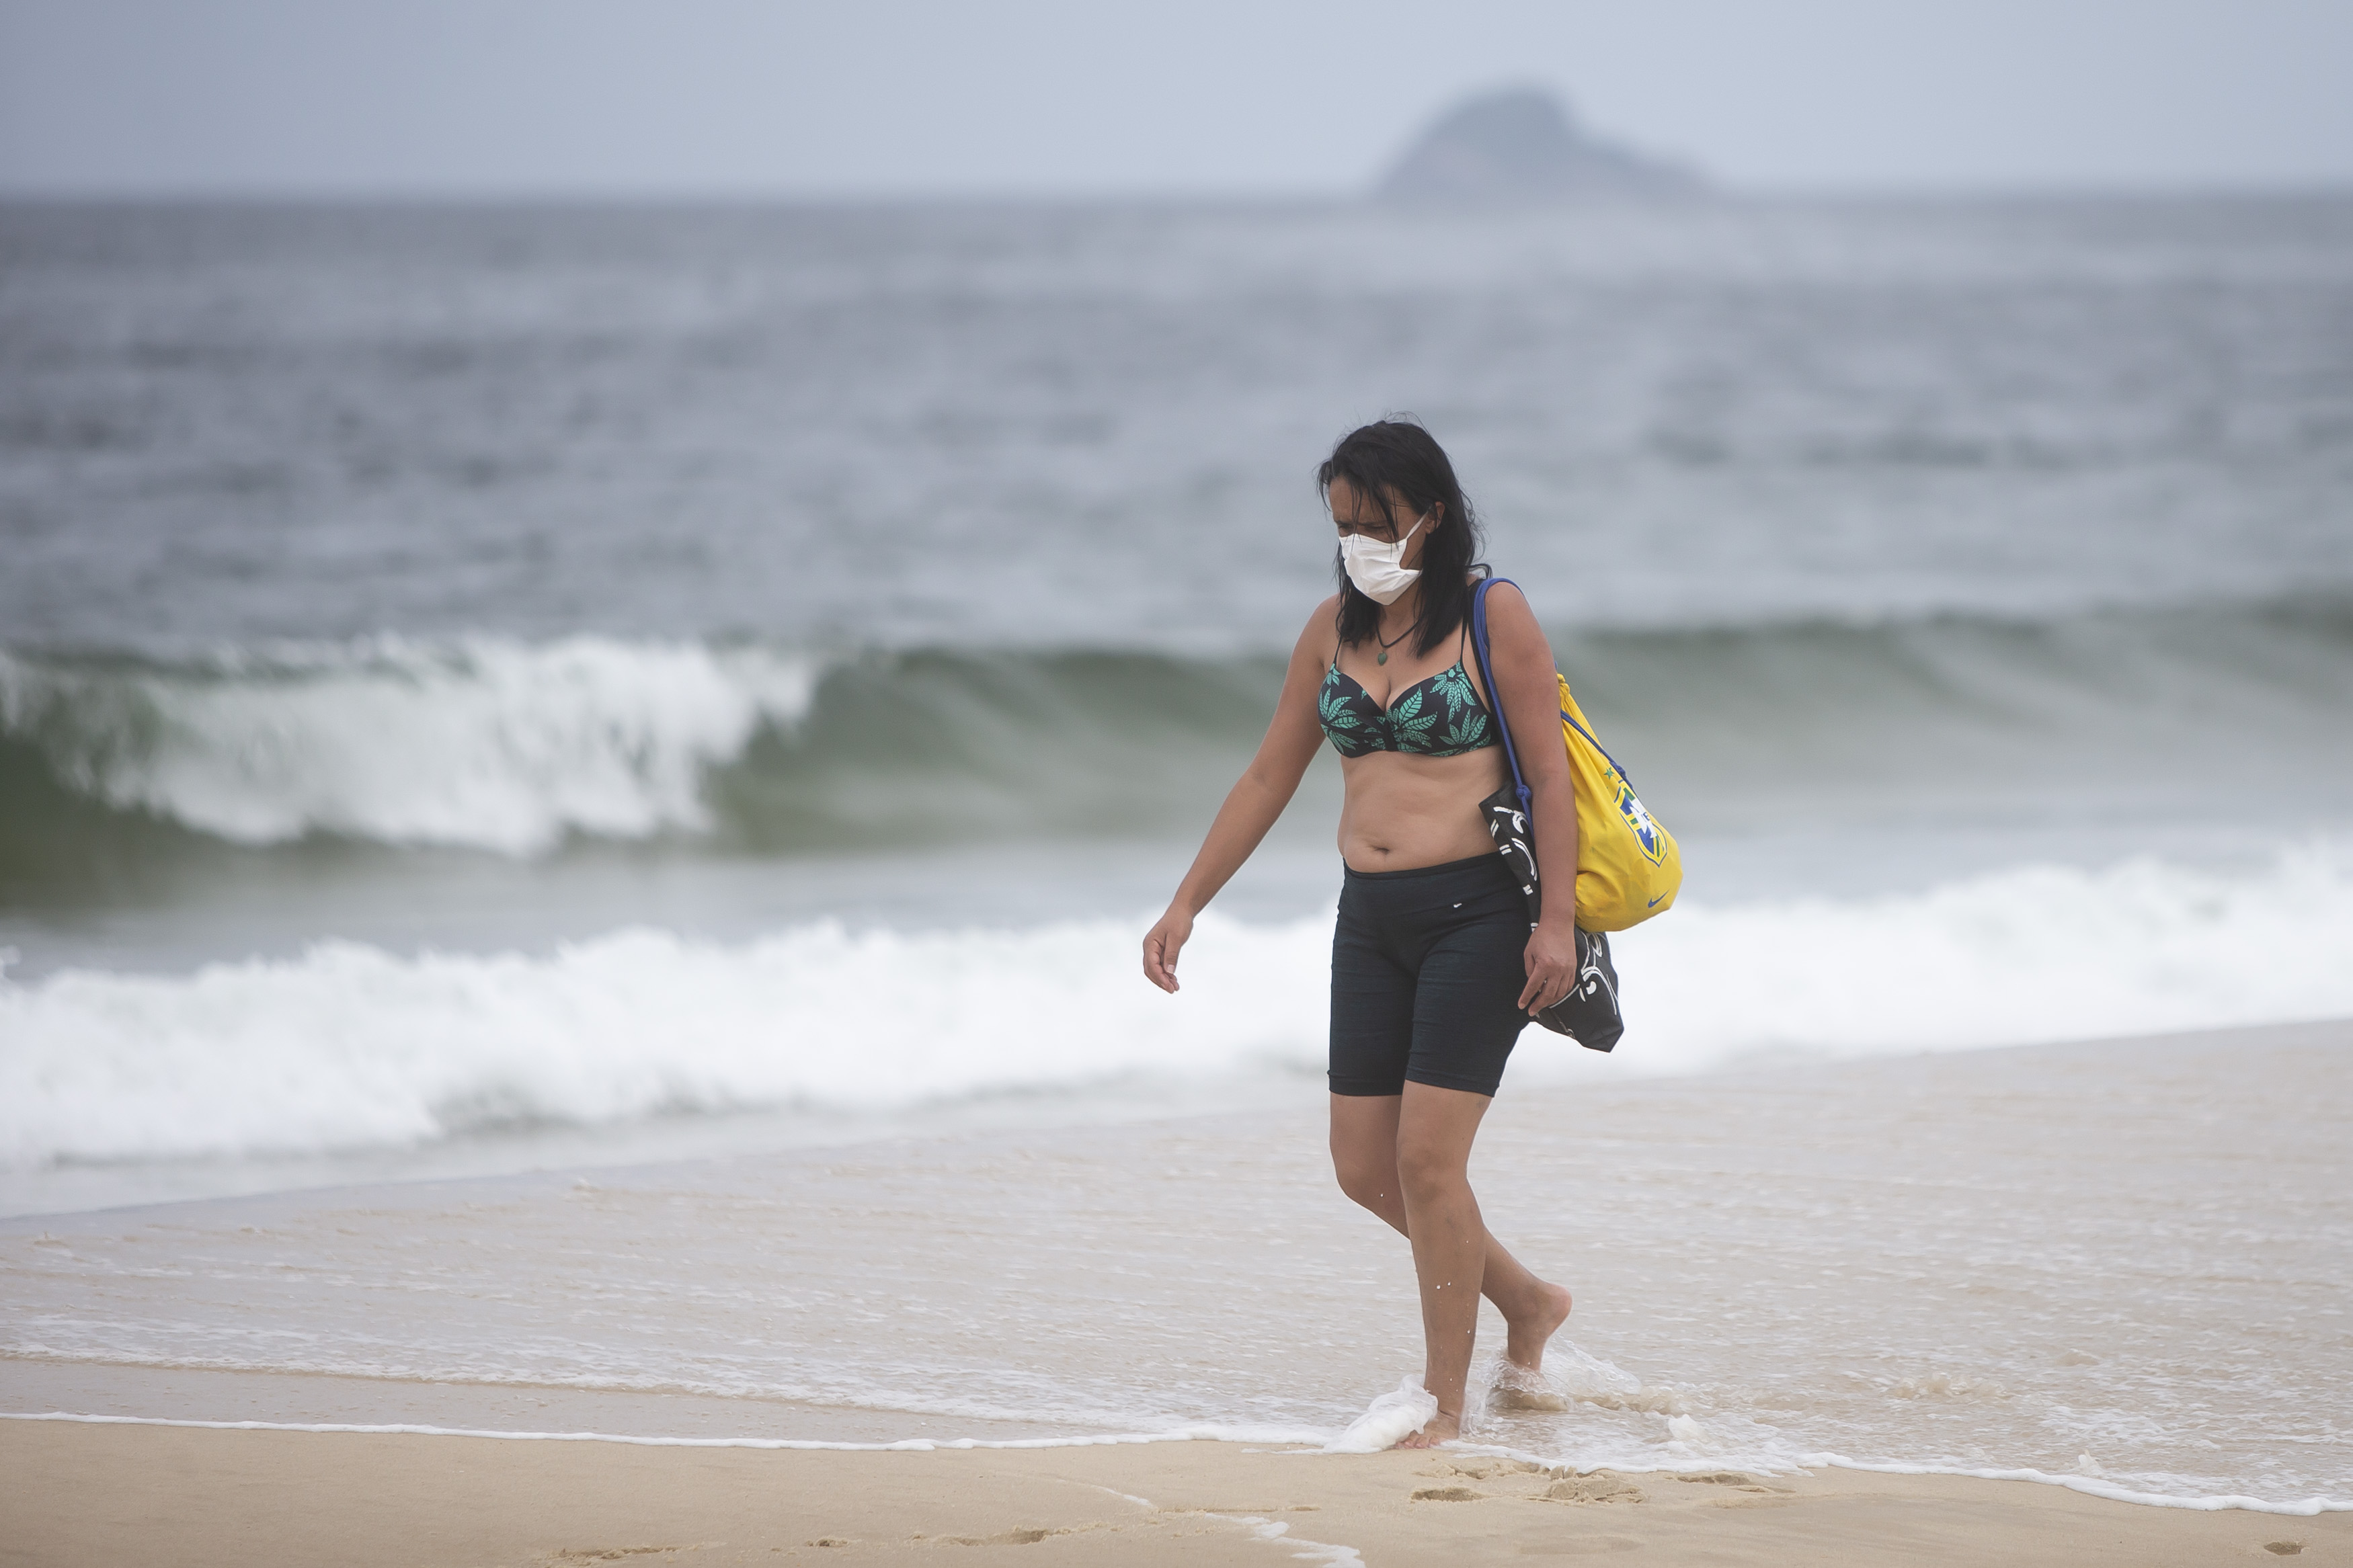 RIO DE JANEIRO, BRAZIL - MARCH 21: A beachgoer wearing a mask walks at Ipanema Beach during a lockdown aimed at stopping the spread of the (COVID-19) coronavirus pandemic.